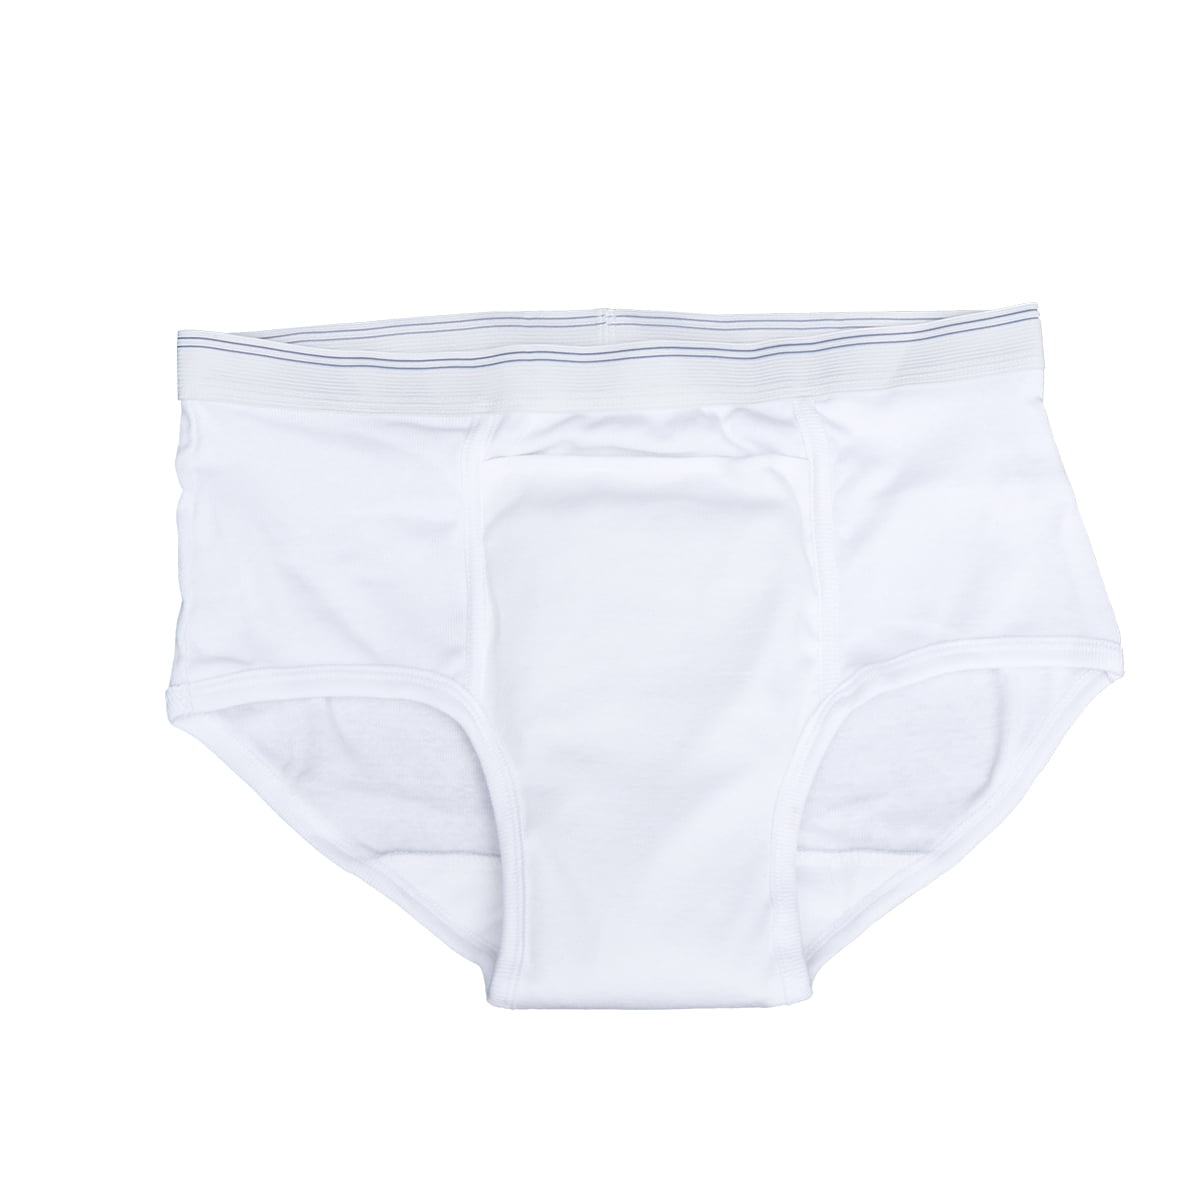 NUOLUX Man Incontinence Briefs Cotton Leakproof Waterproof Briefs for ...